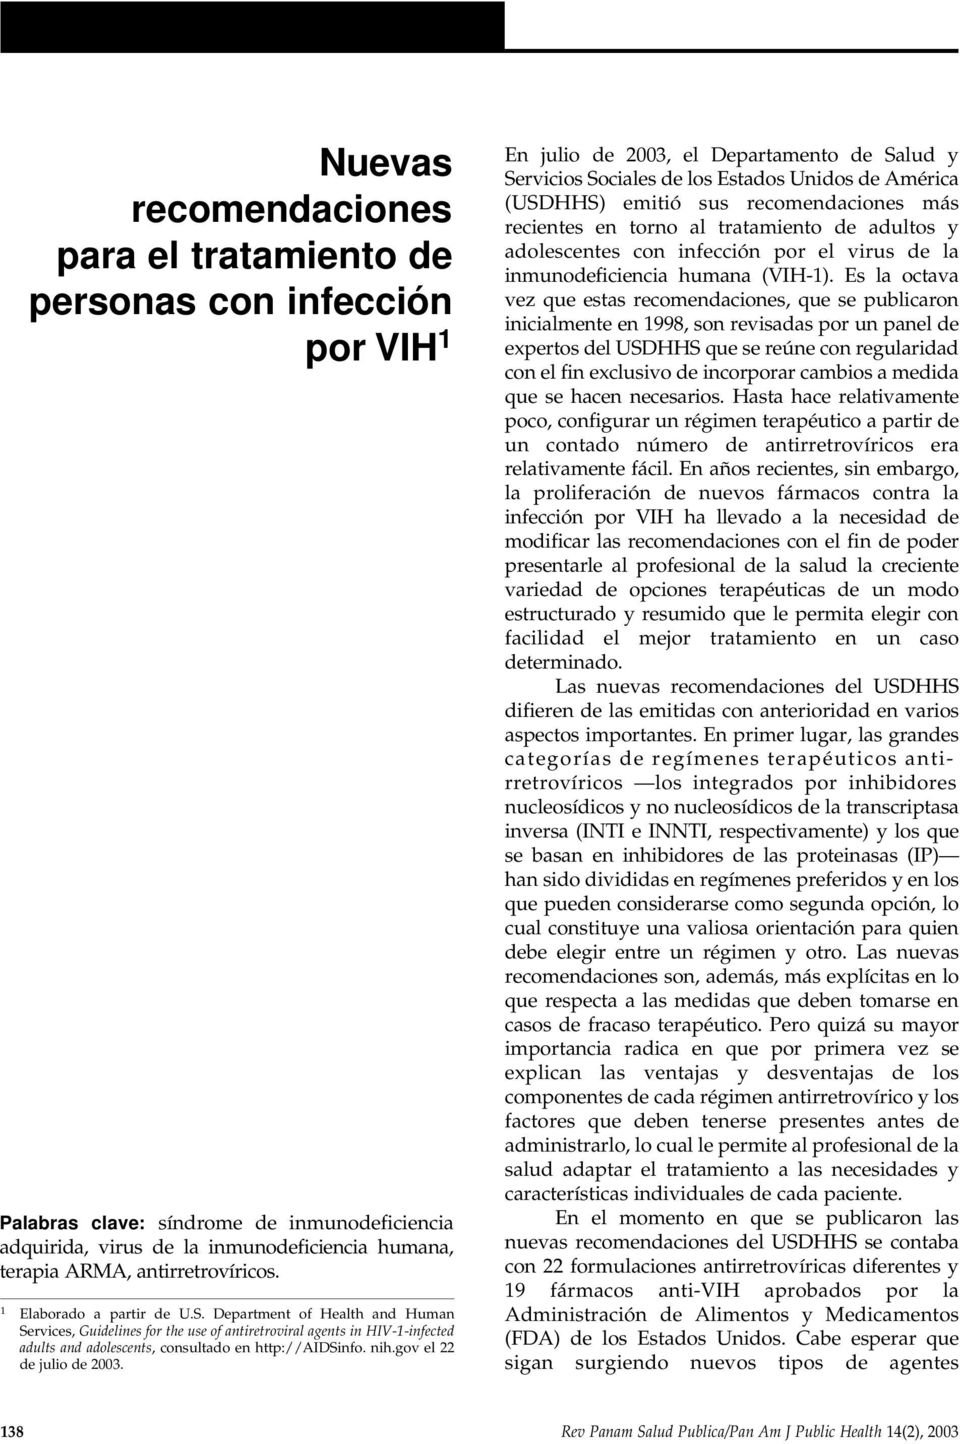 Department of Health and Human Services, Guidelines for the use of antiretroviral agents in HIV-1-infected adults and adolescents, consultado en http://aidsinfo. nih.gov el 22 de julio de 2003.